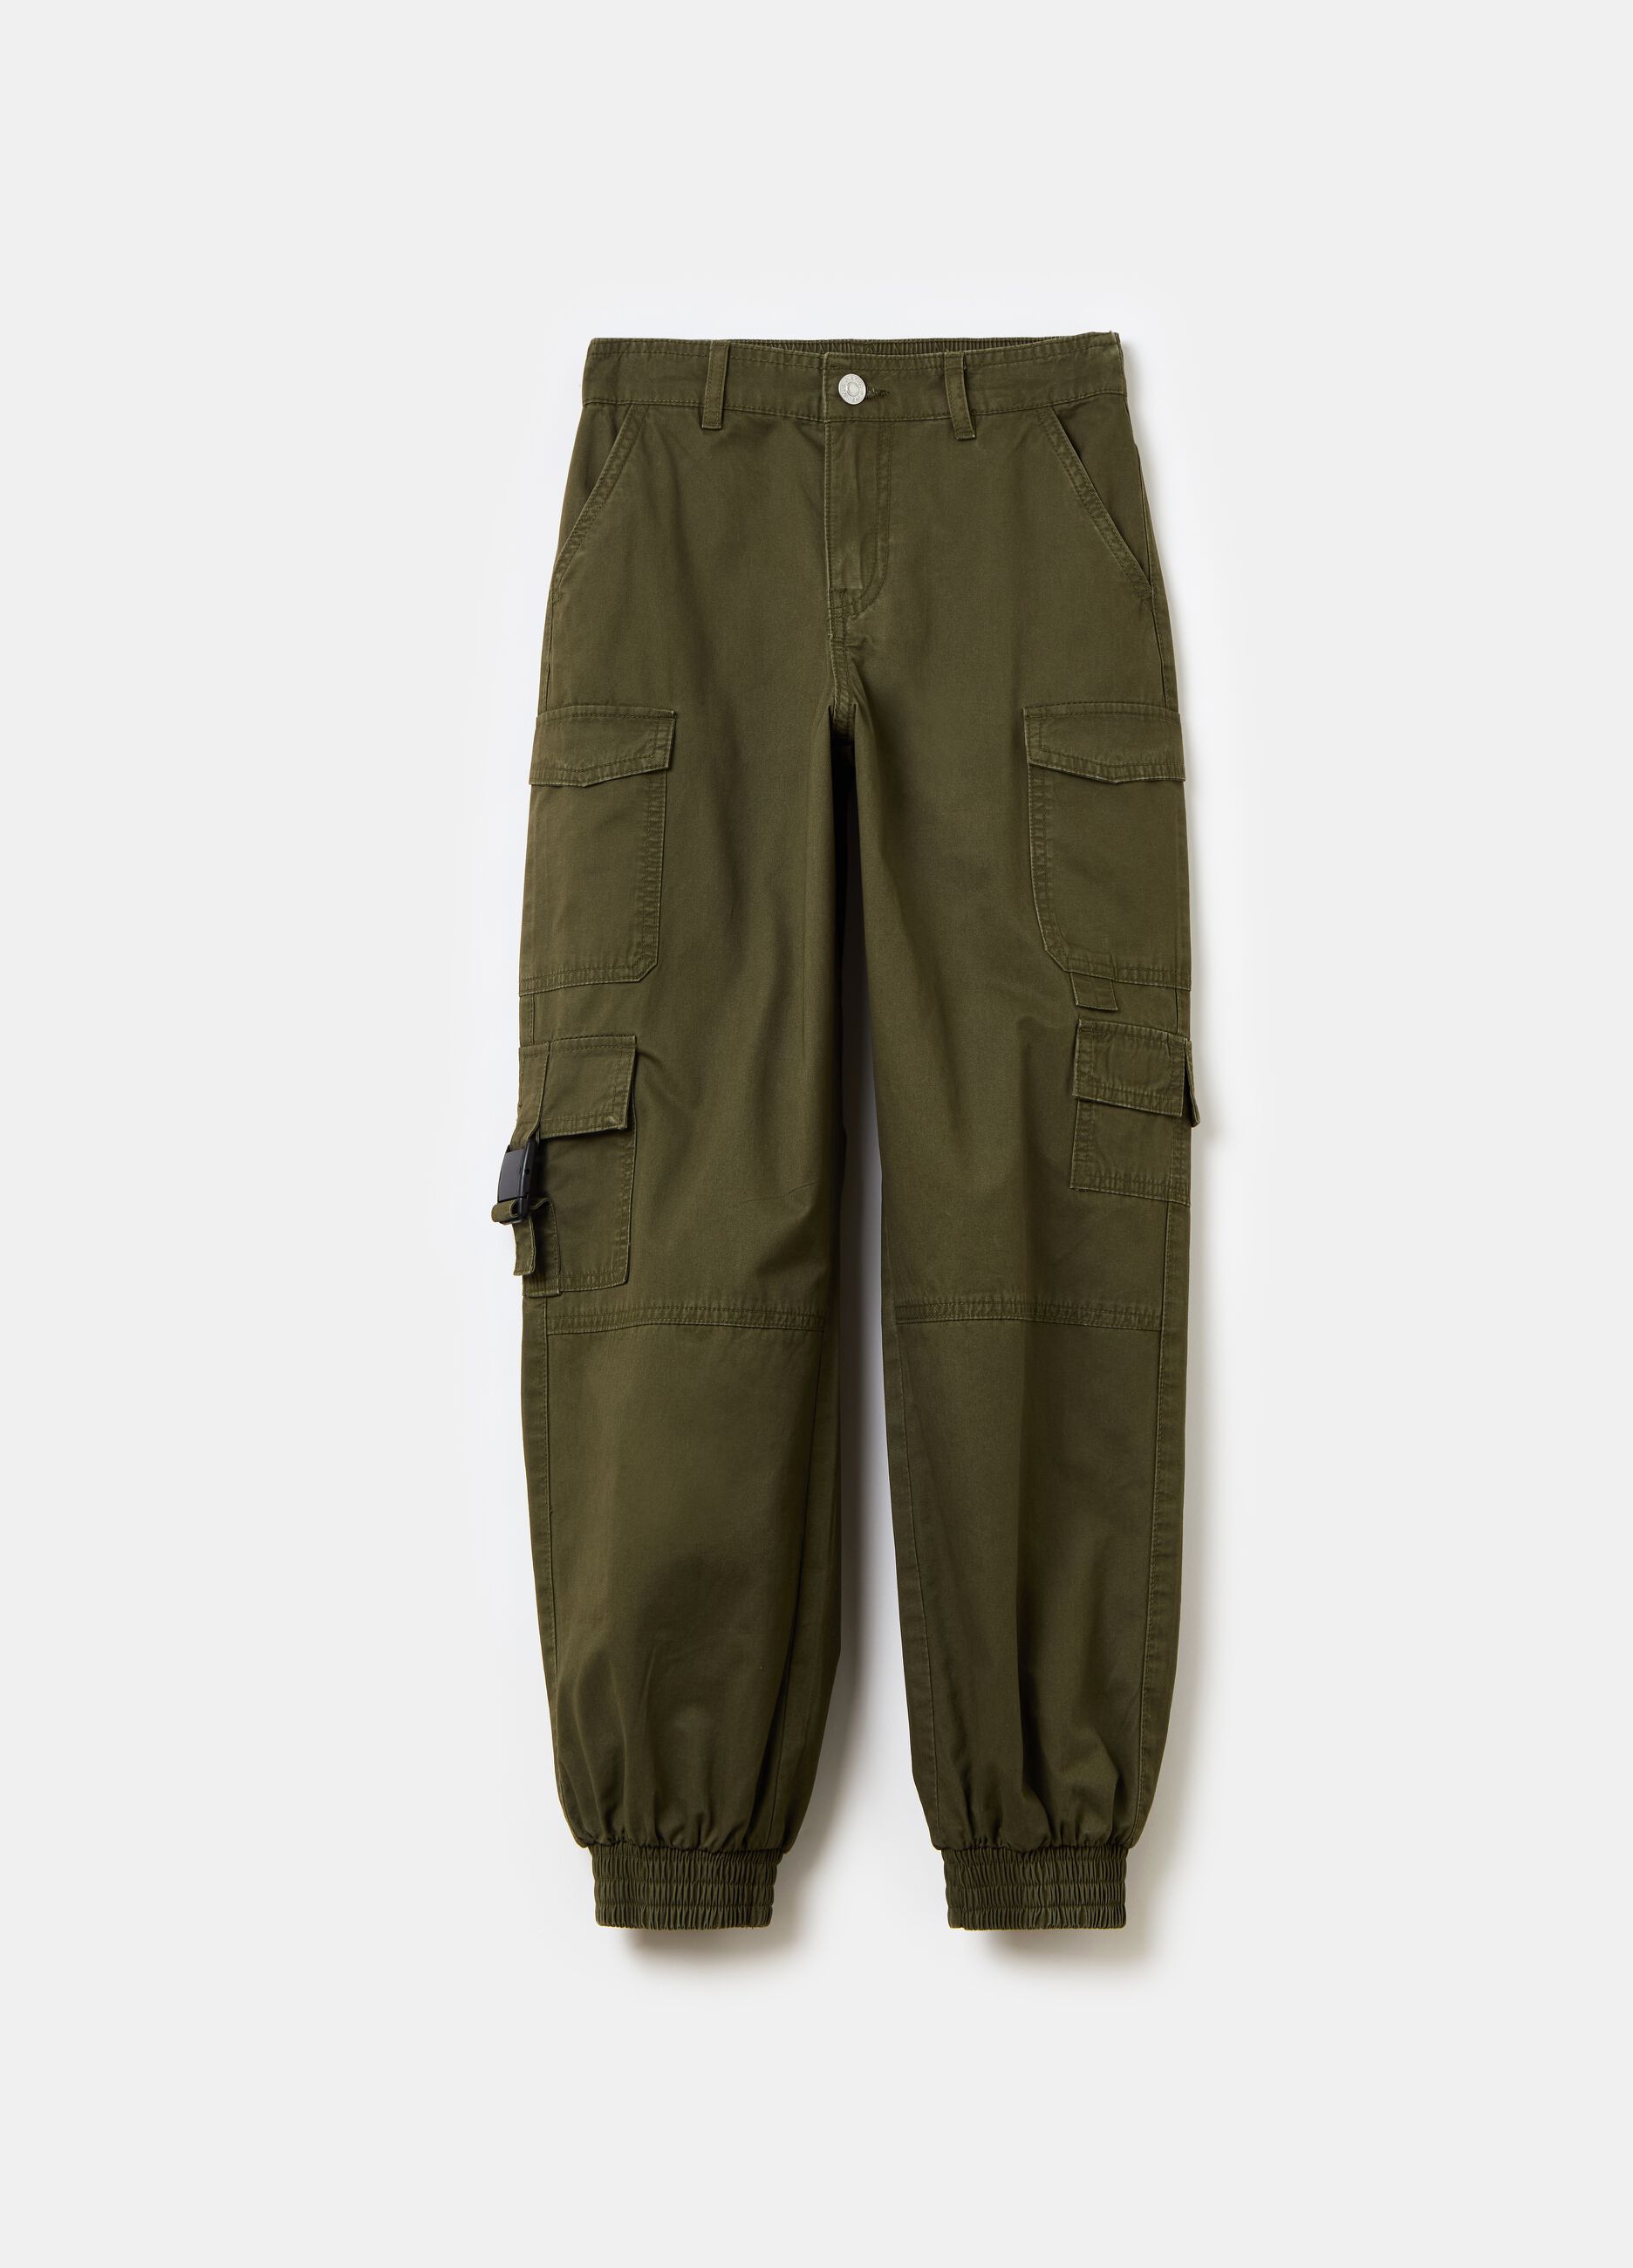 Cotton cargo trousers with multiple pockets